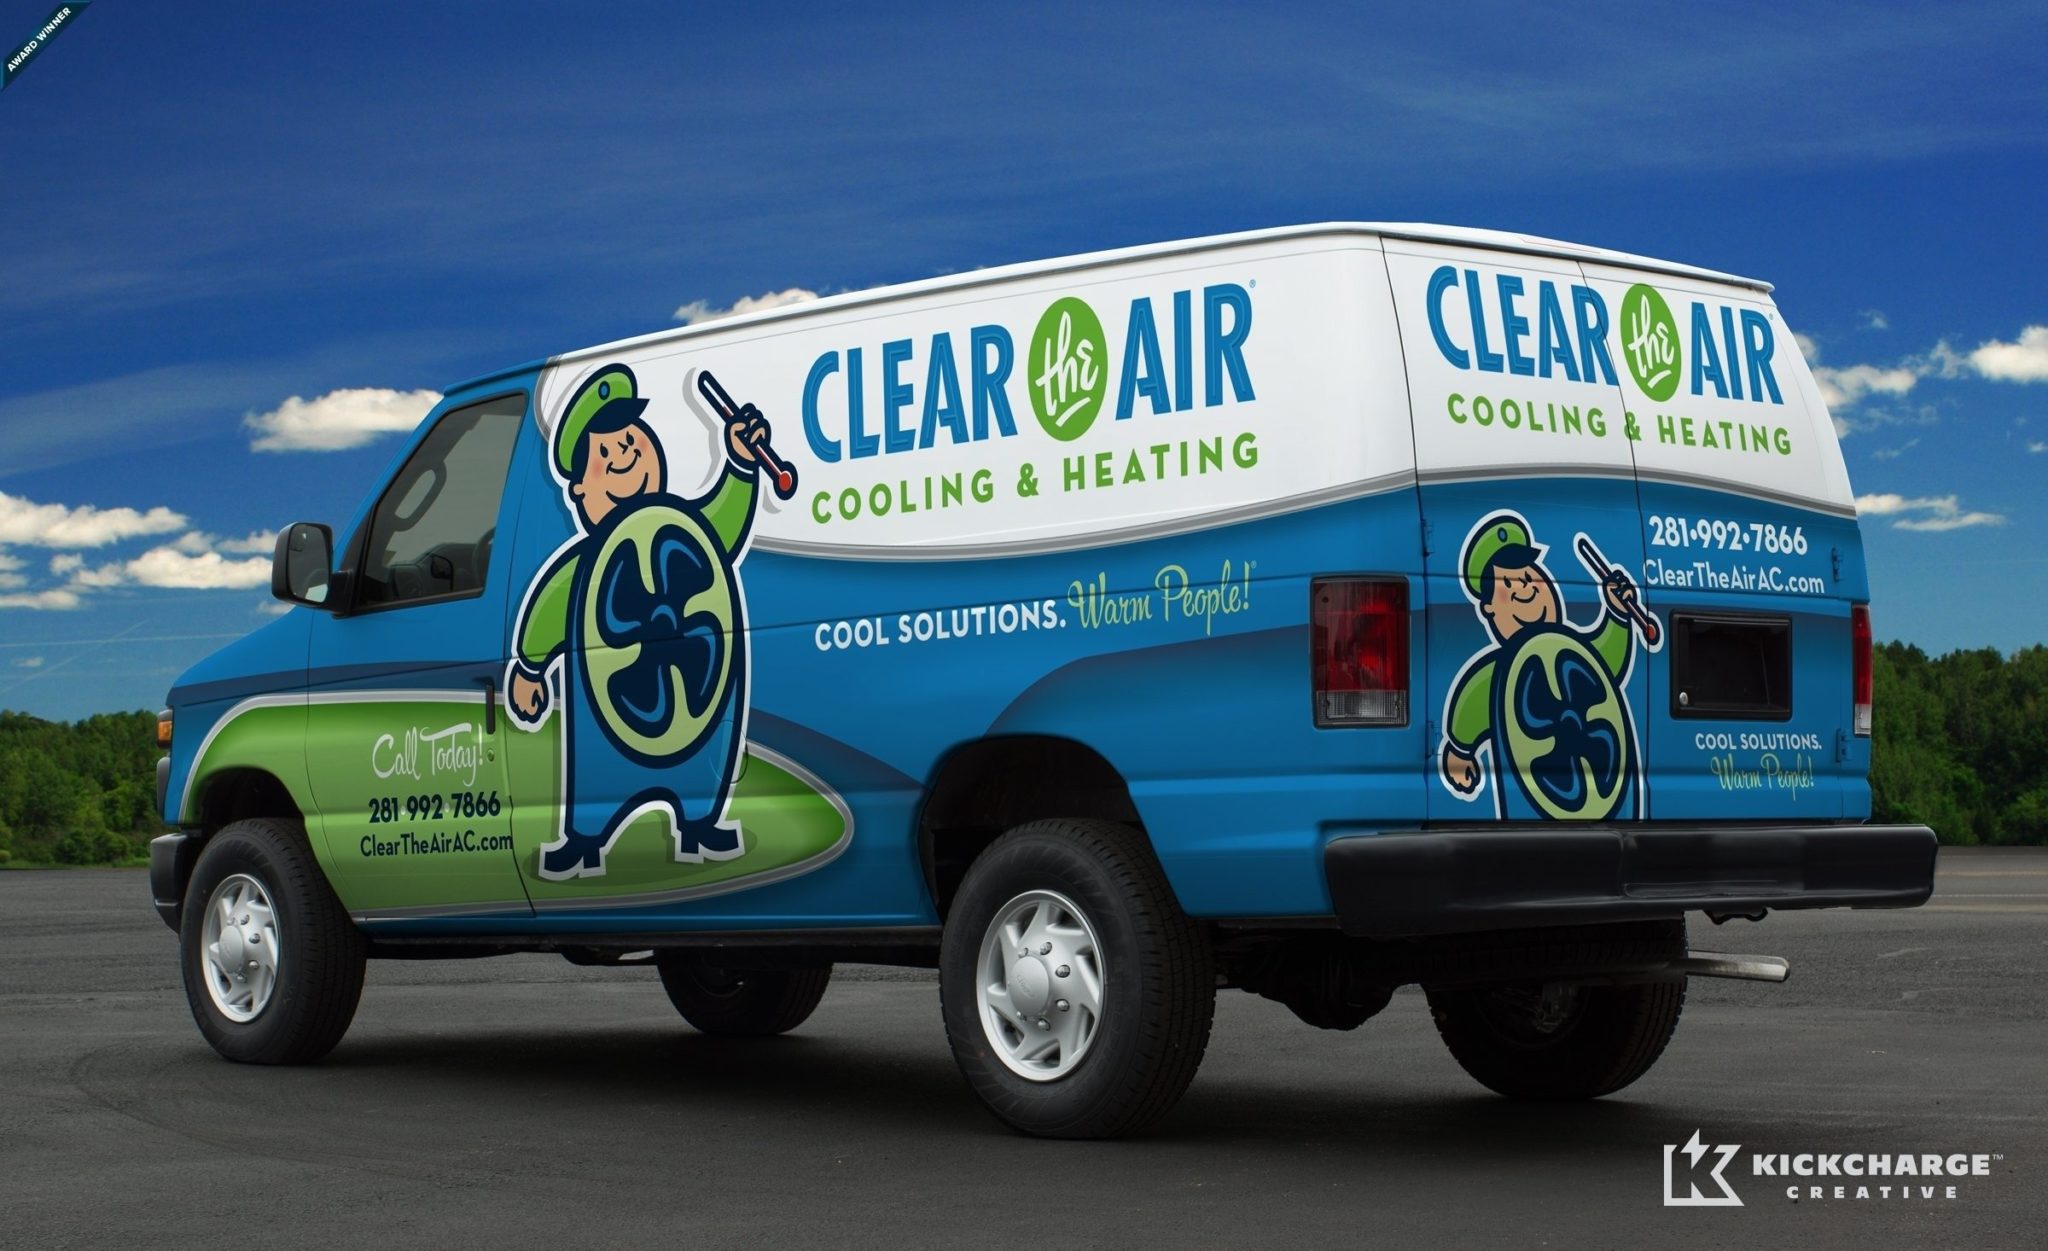 Award-winning truck wrap design for this HVAC contractor in Texas. Winner of 2014 Tops in Trucks Contest from HVACR Magazine and third place winner of the Signs of the Times 9th Annual Graphics Contest for service vehicles.